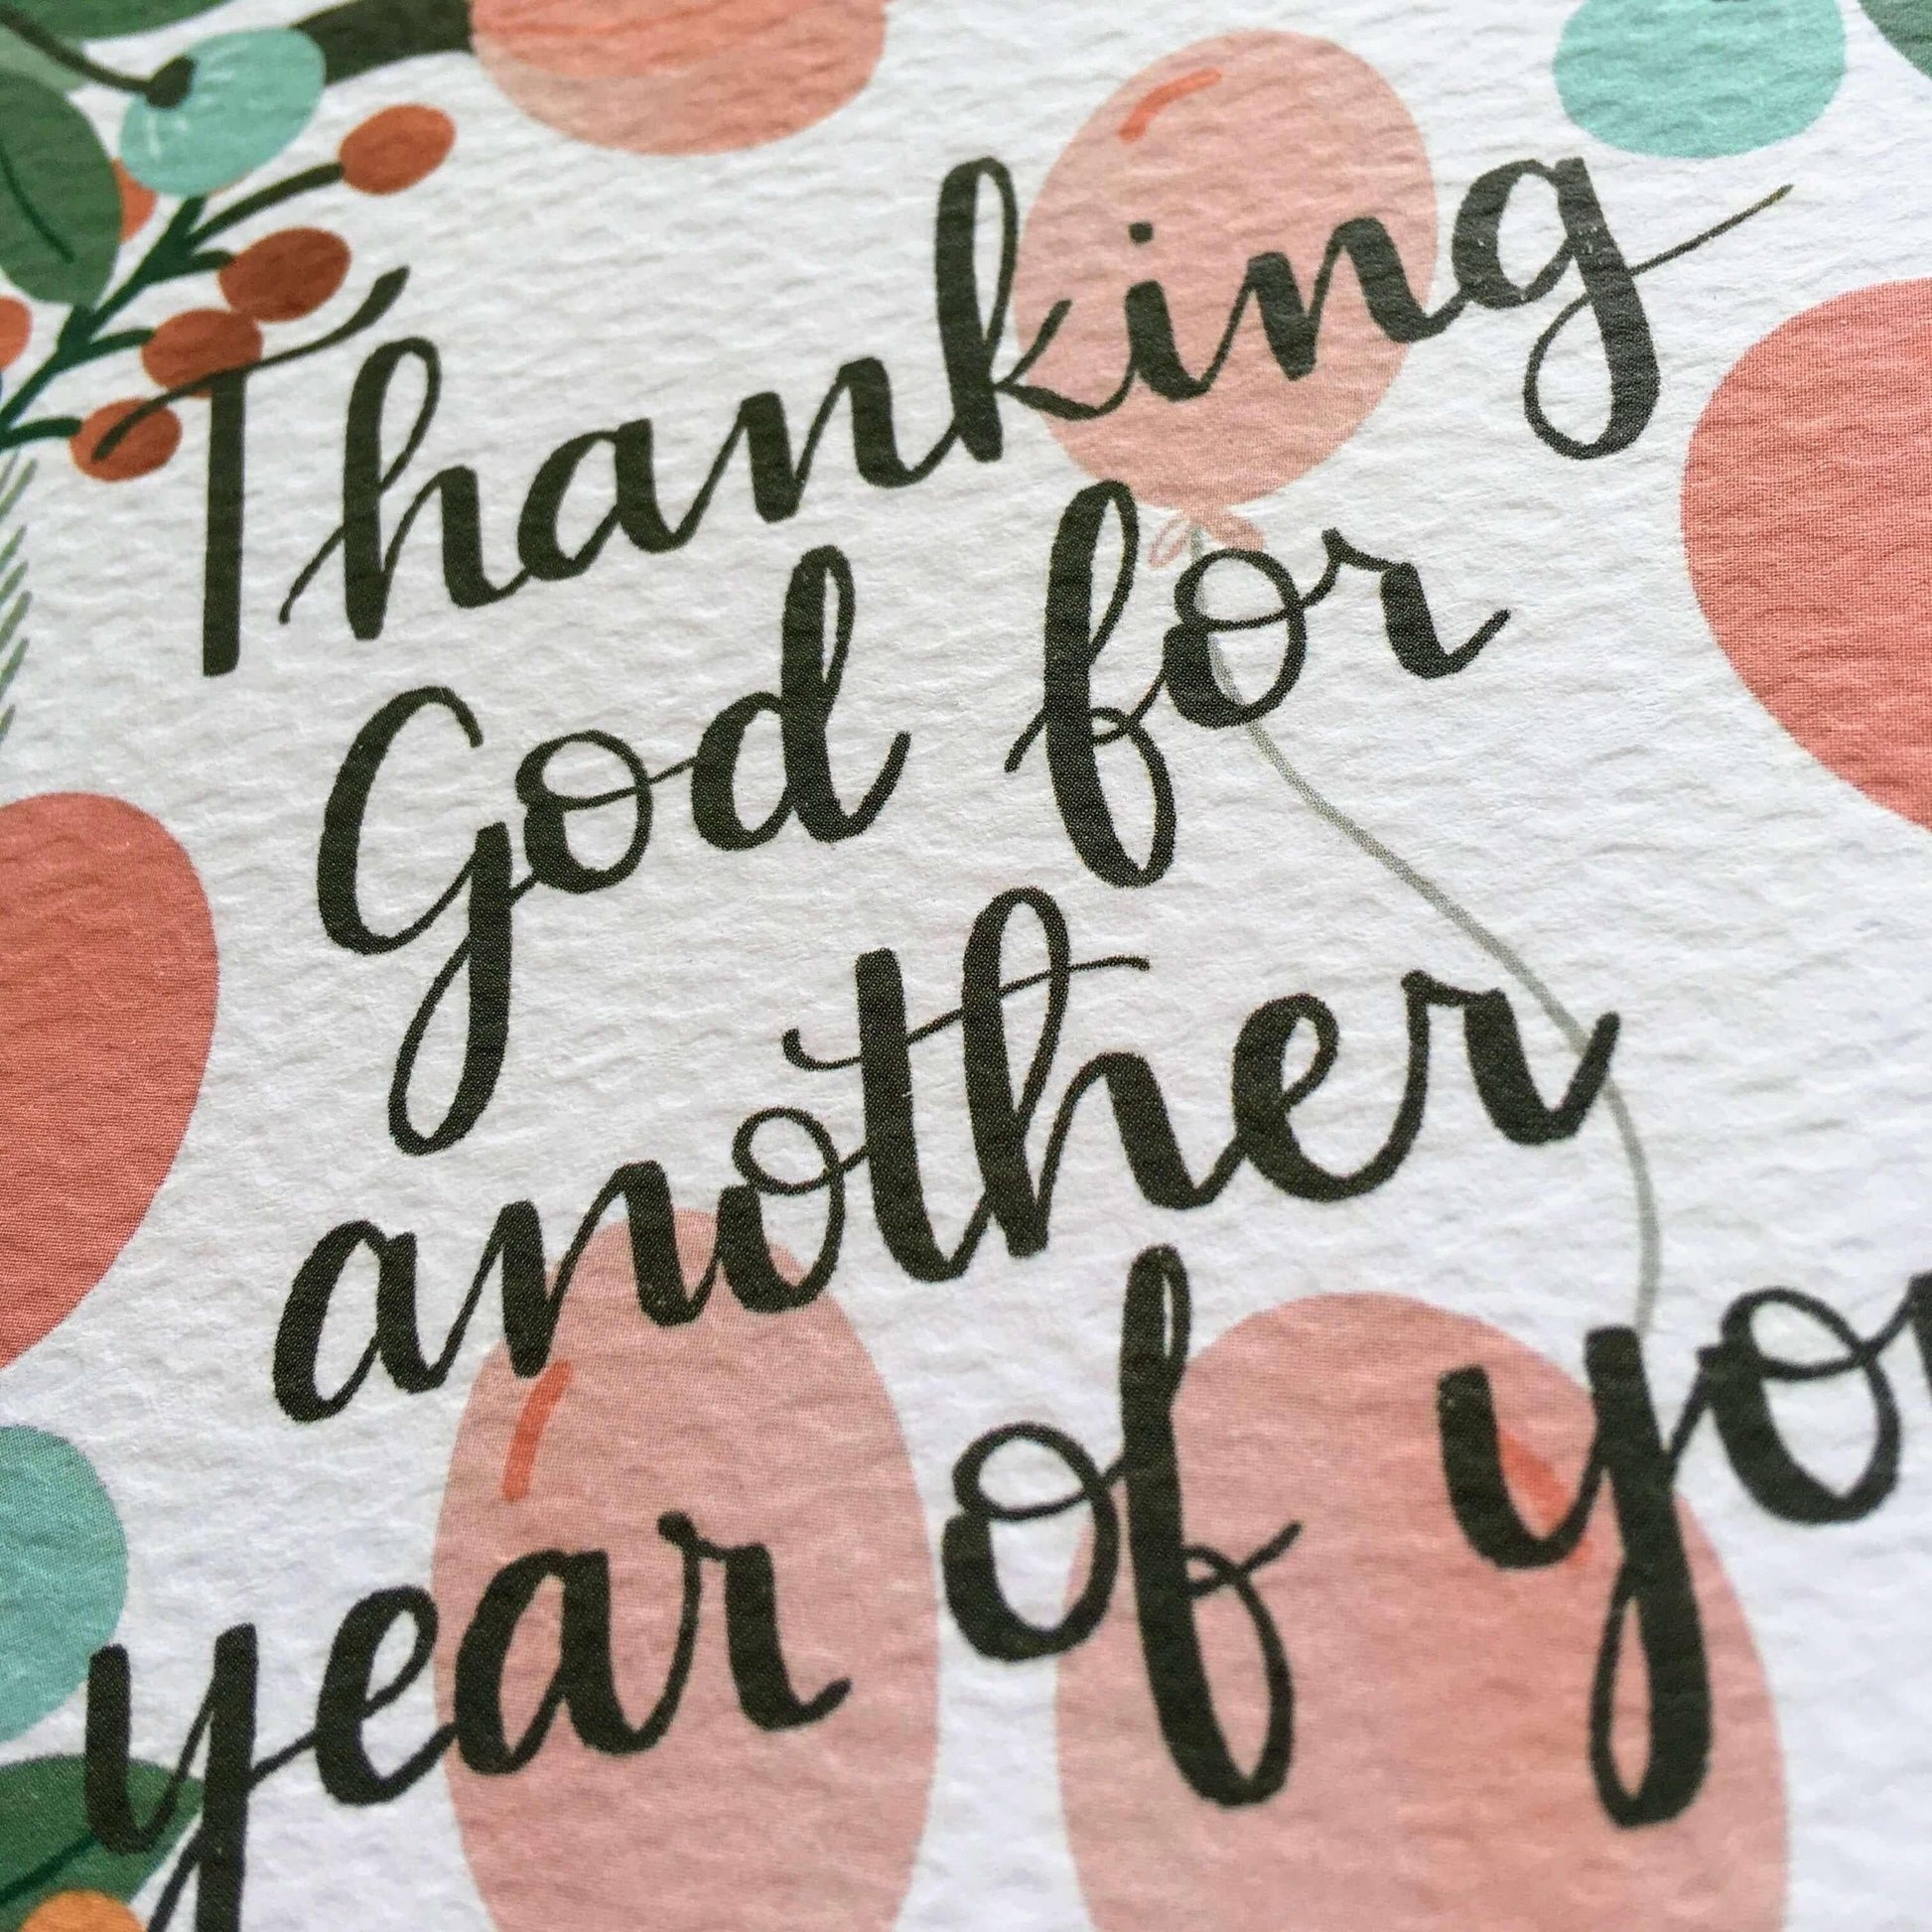 Thanking God for another year of you birthday card And Hope Designs Cards